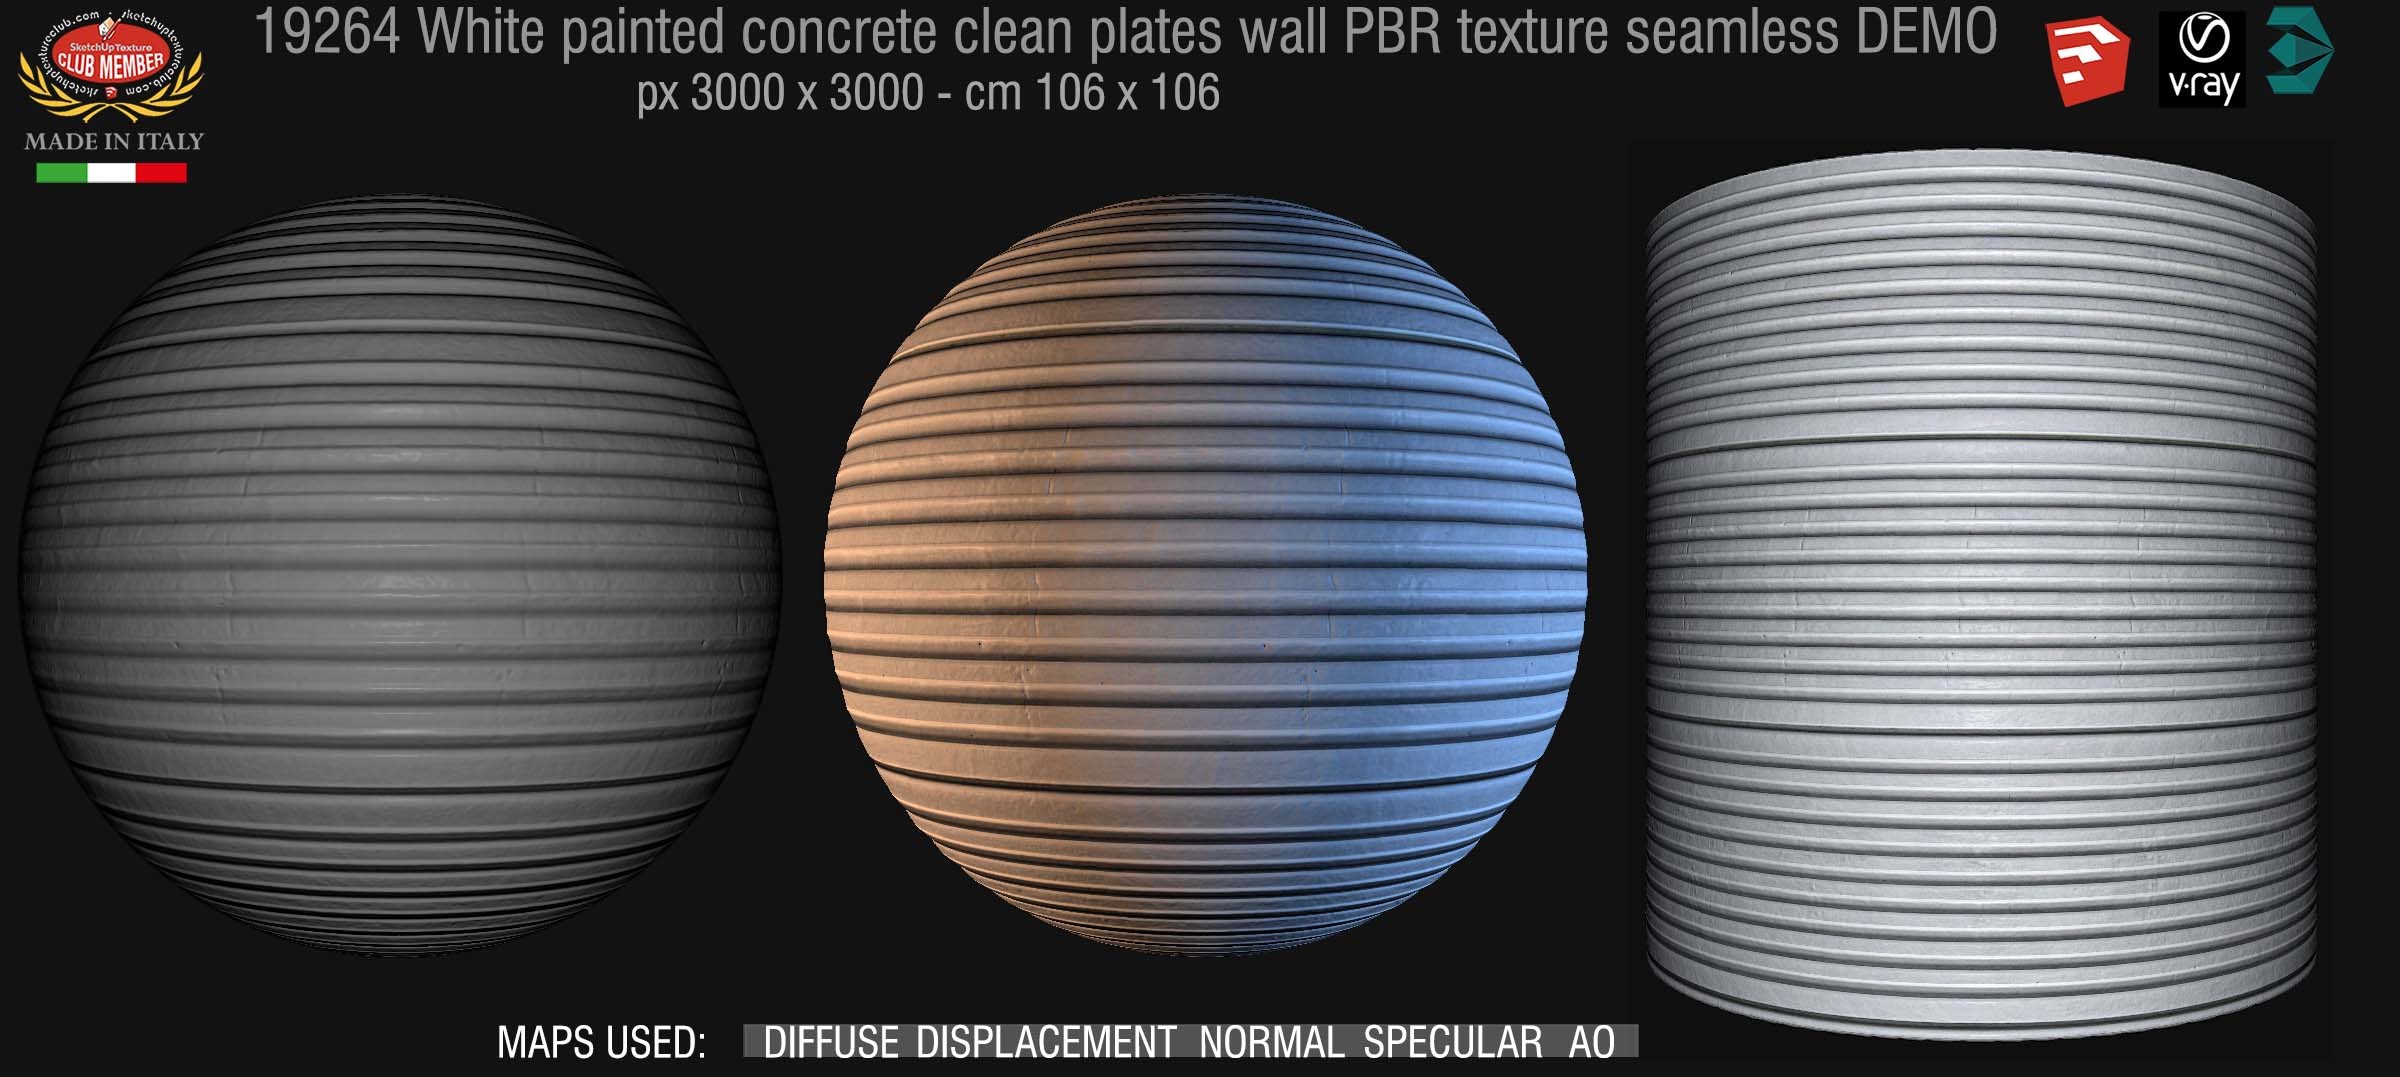 19264 White painted concrete clean plates wall PBR texture seamless